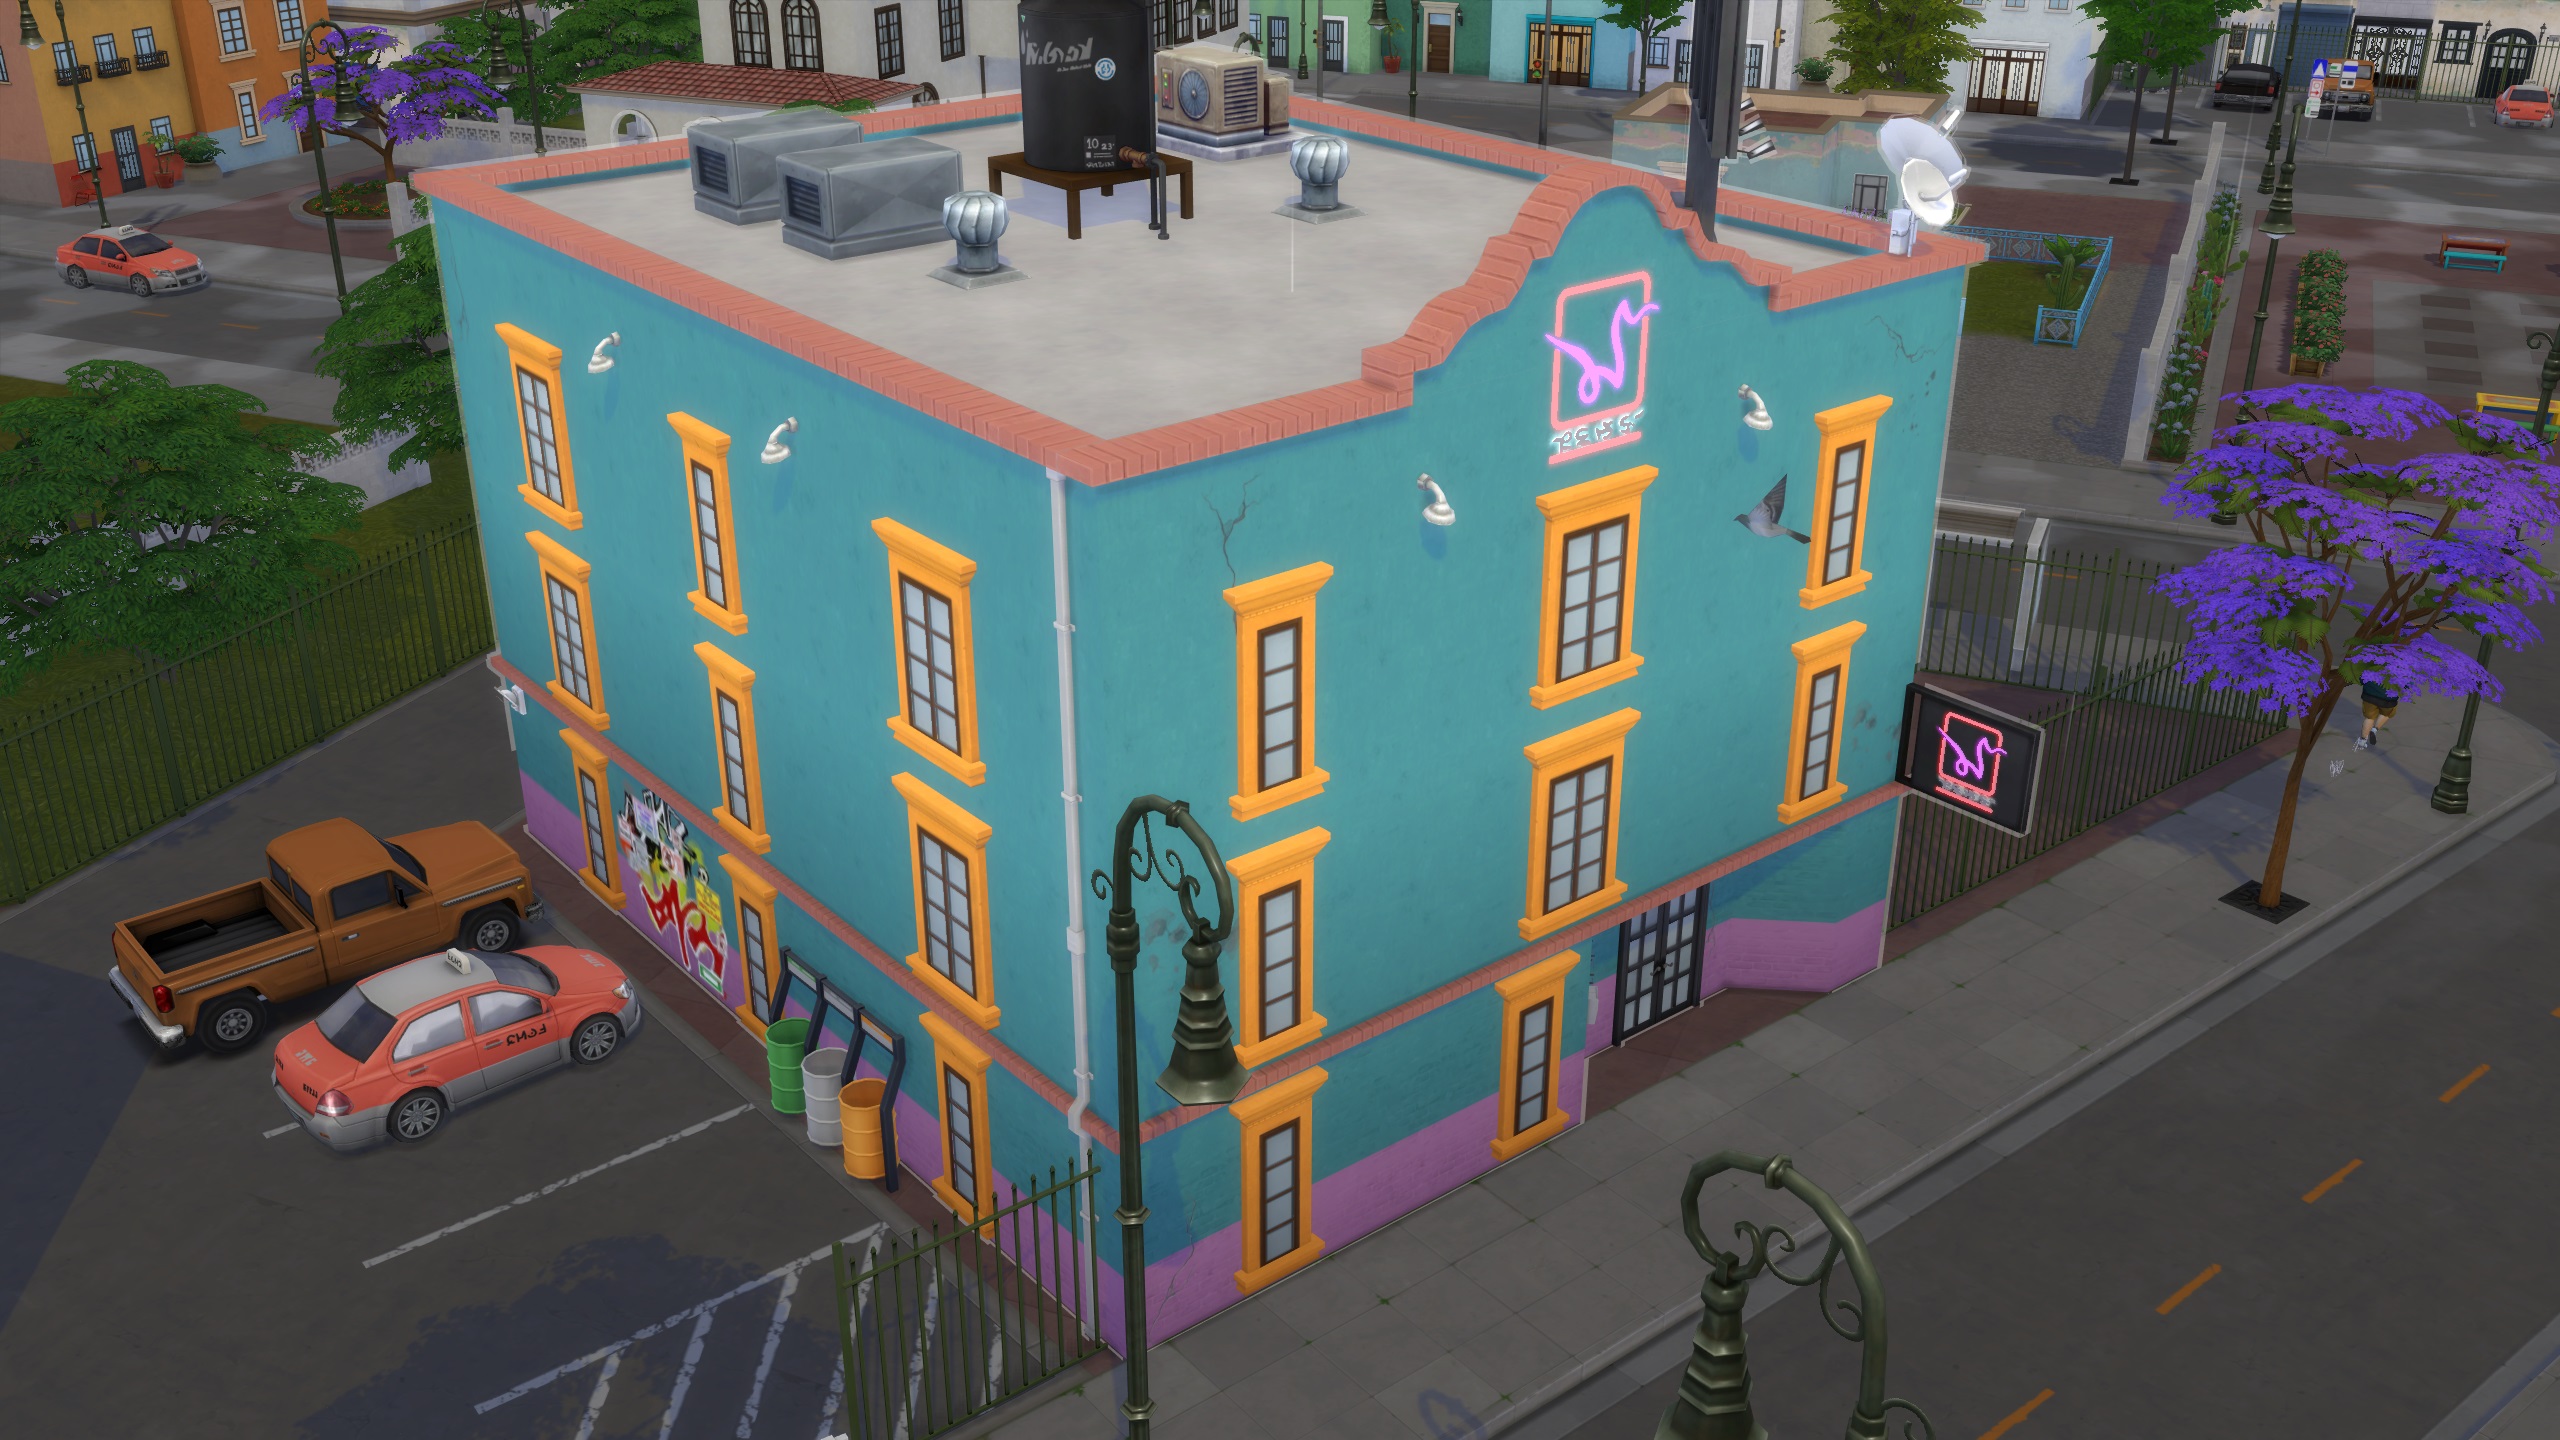 How to find the ‘Wealthy Weirdo’ at the Beso Rápido Motel in The Sims 4 Lovestruck expansion